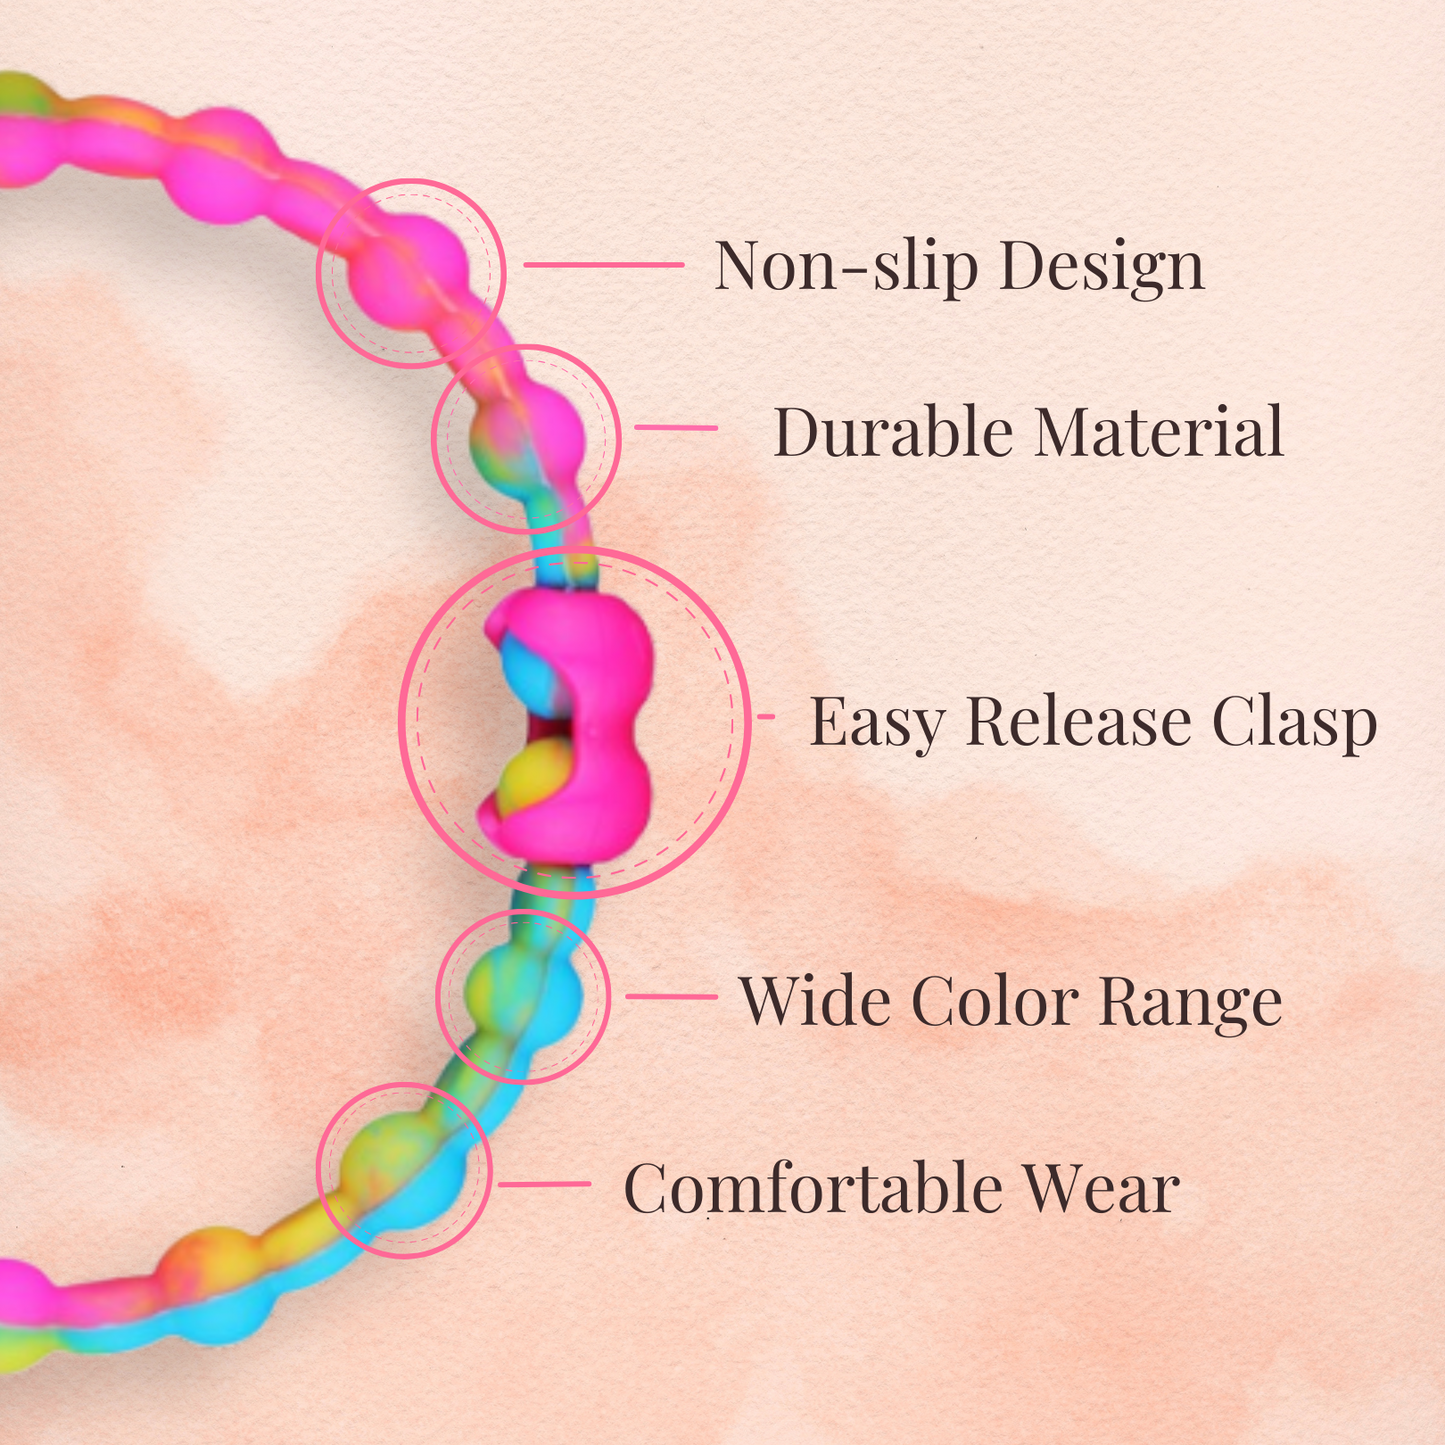 Autumn Blaze Pack PRO Hair Ties (6-Pack): Capture the Warmth of Fall in Every Strand